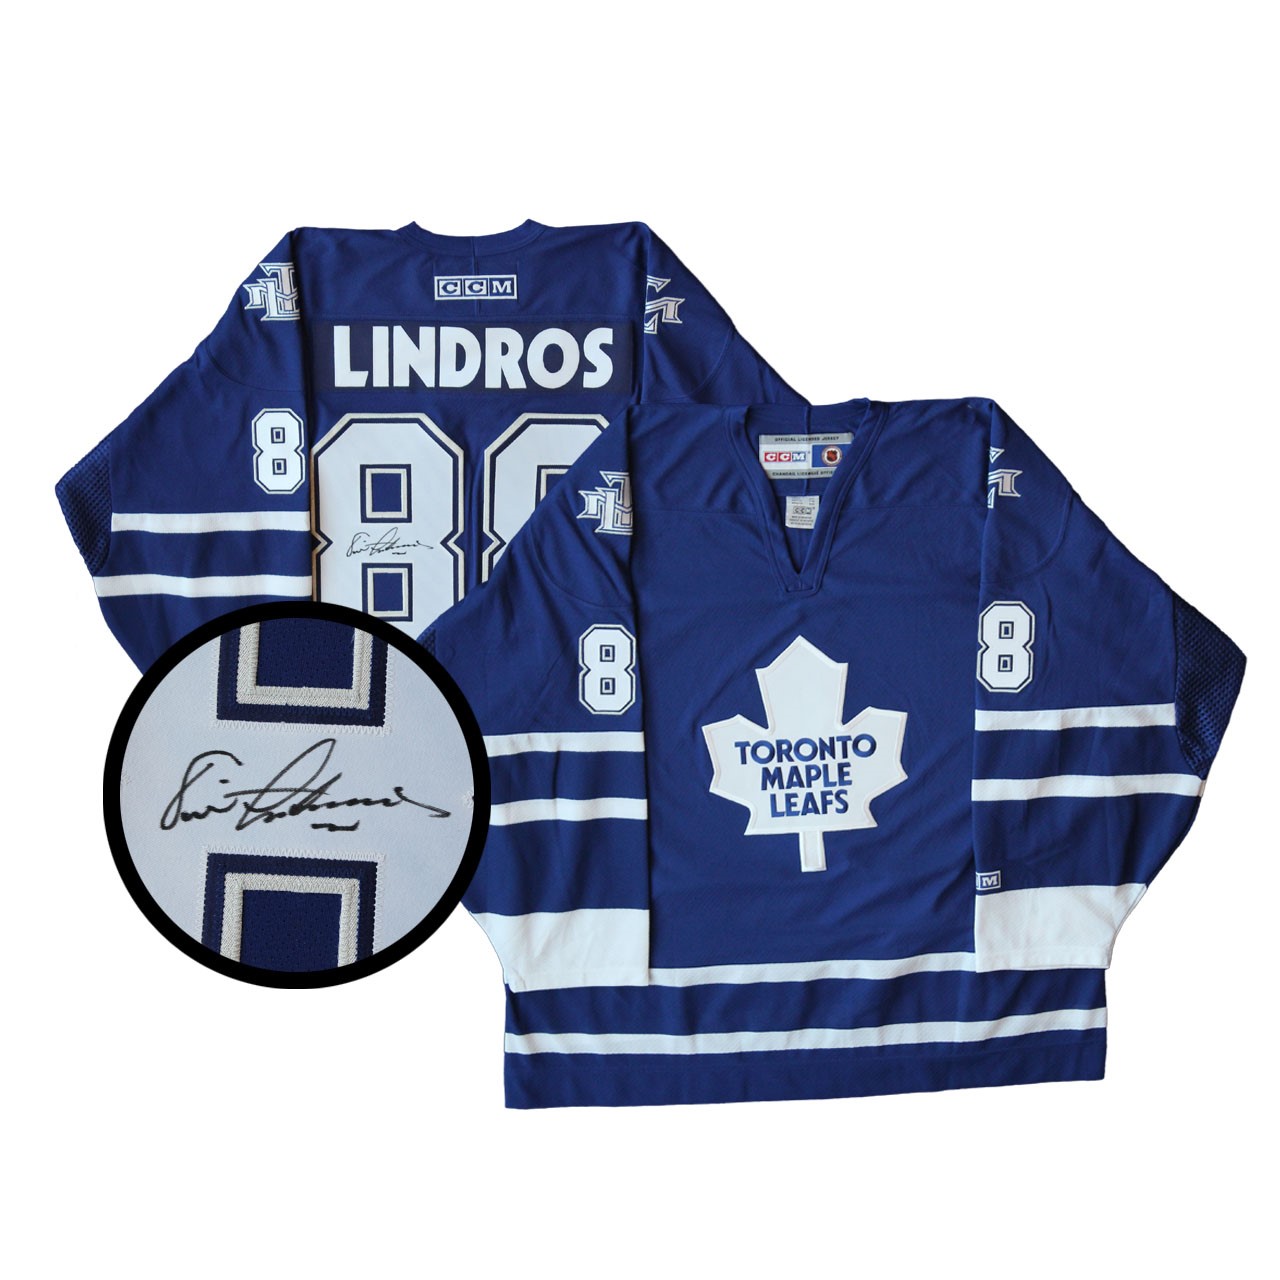 ERIC LINDROS Signed White Toronto Maple Leafs Jersey - NHL Auctions